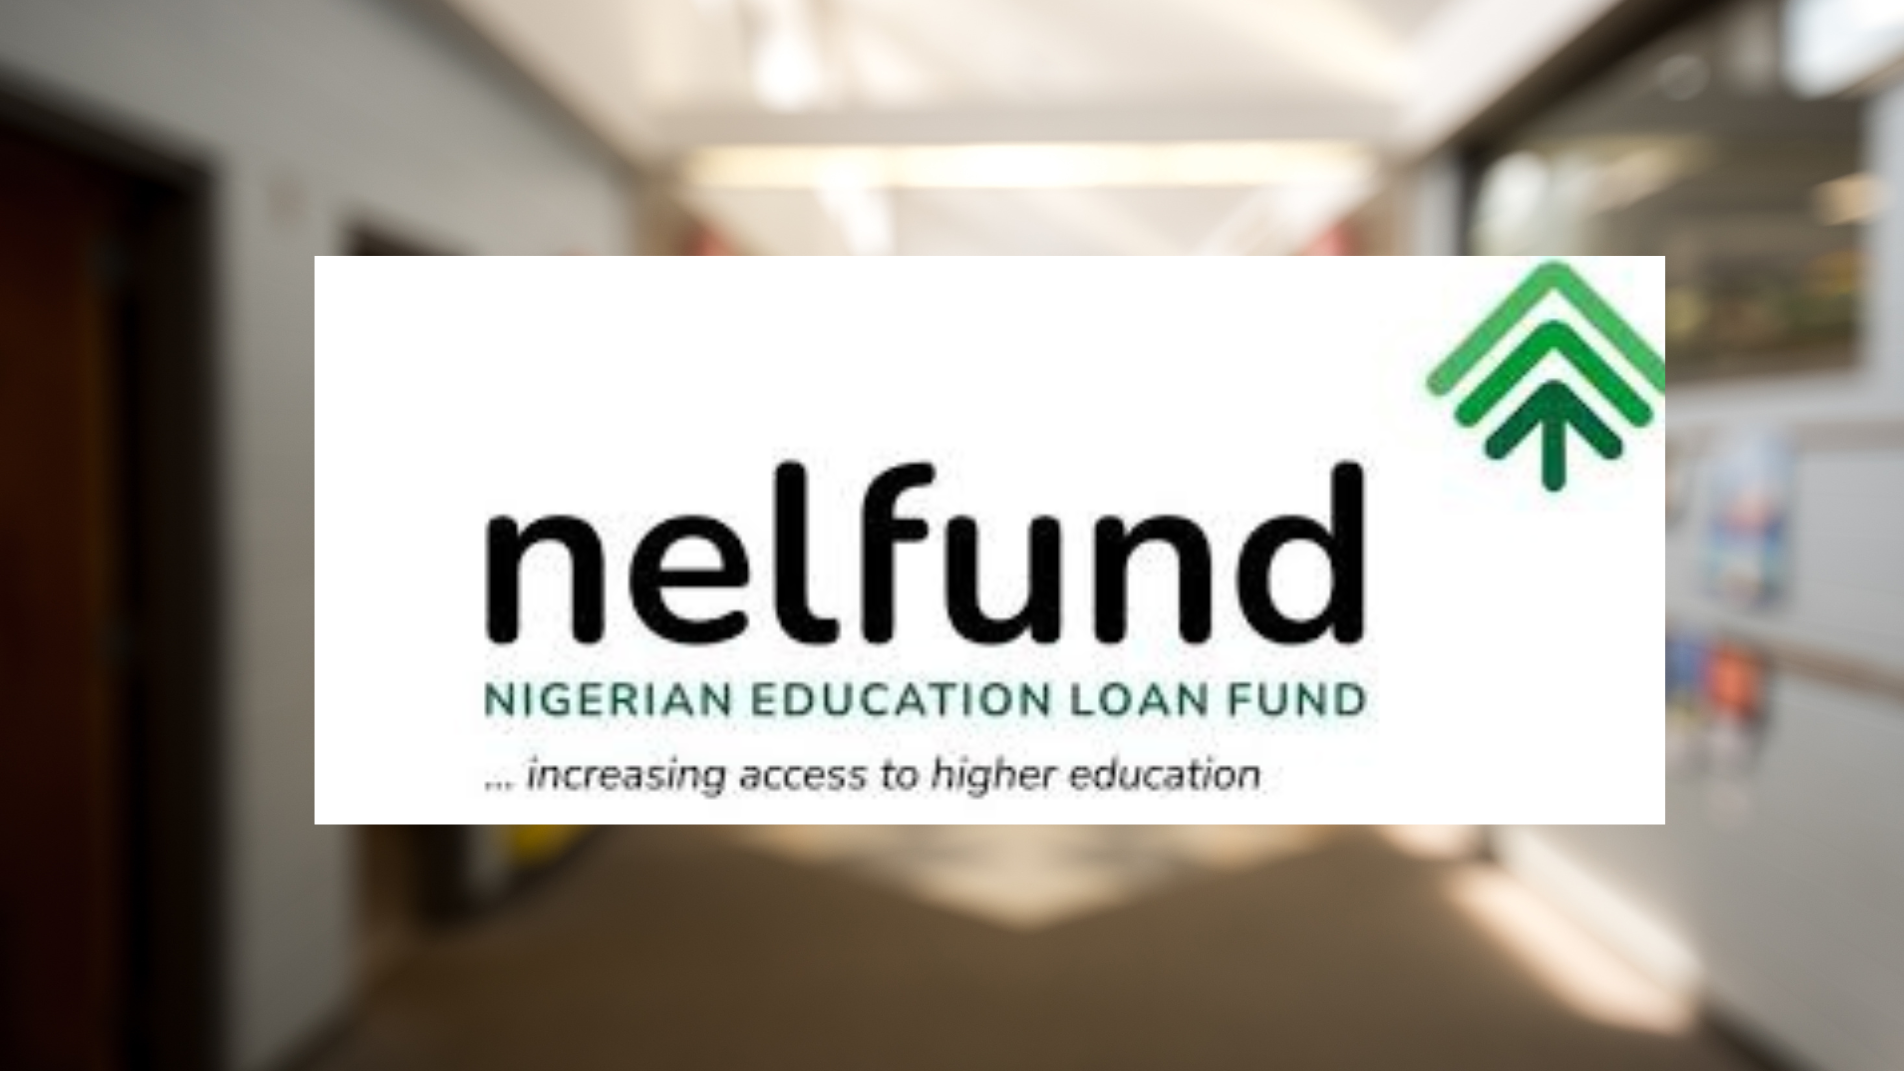 Federal University Students to be First Beneficiaries of Student Loan